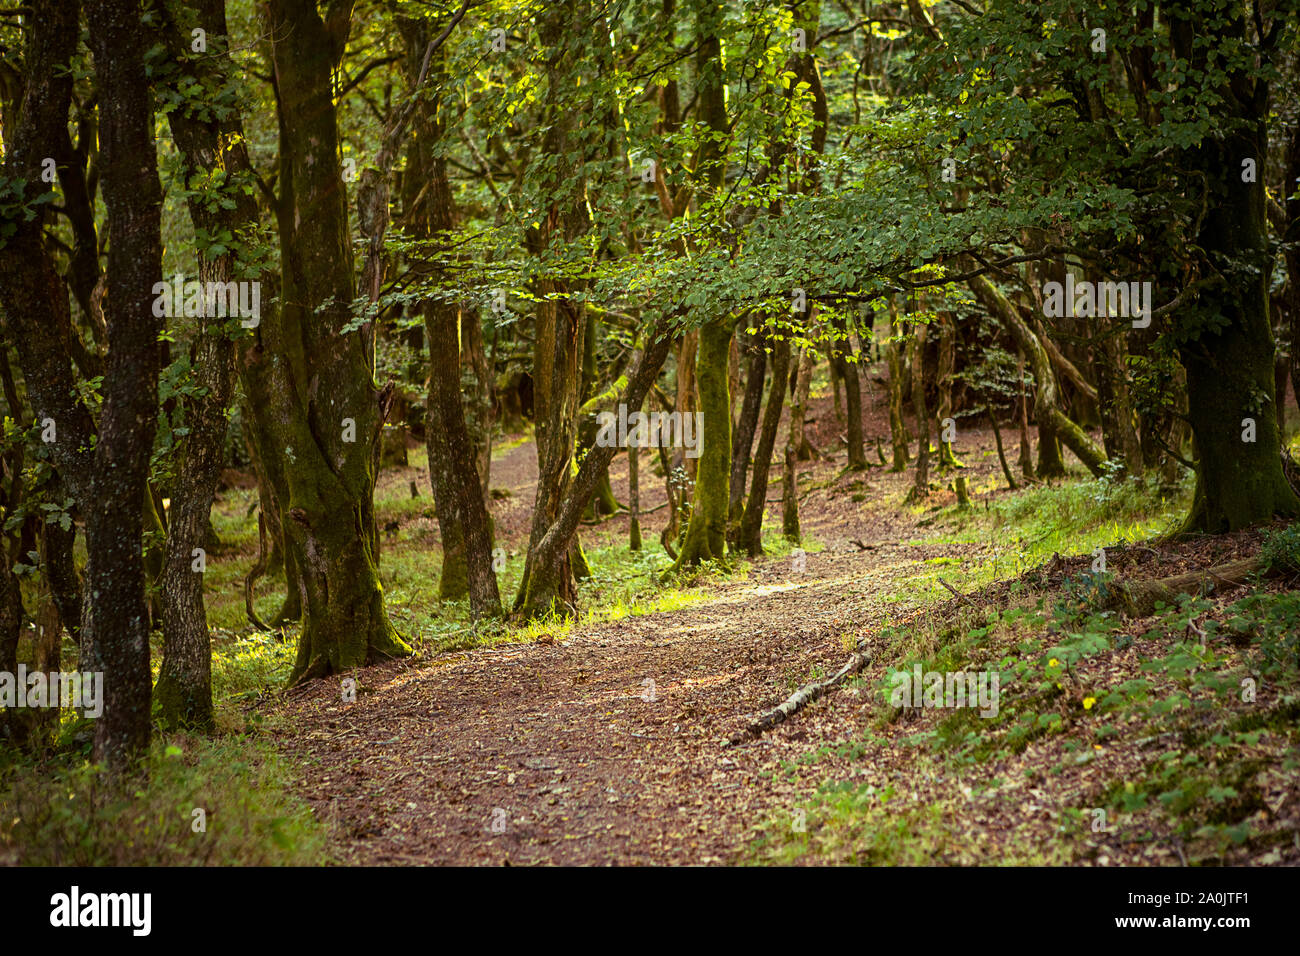 English woodland. Scenic path in magic green wood. Summer, England UK. Tree trunks, sunlight. Trail inside the forest. Romantic landscape. Stock Photo